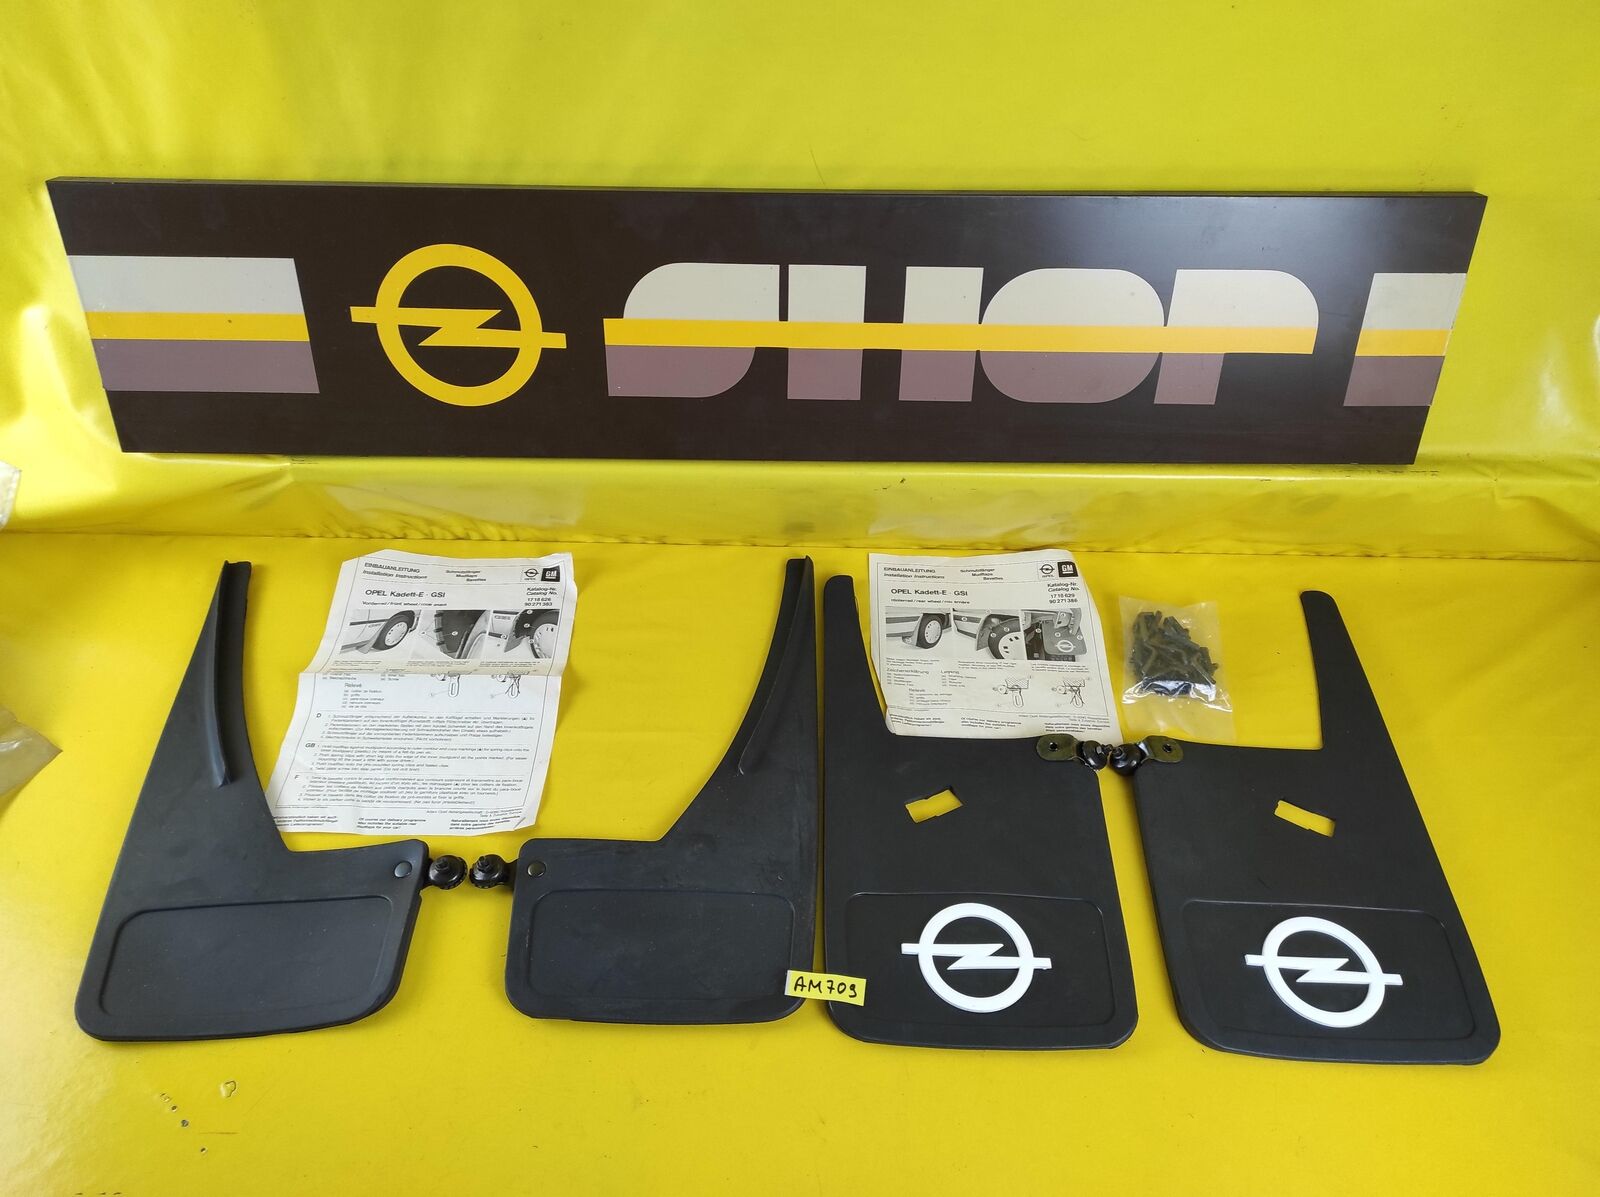 Dirt catcher pair front rear Opel cadet E GSI spray protection mud flaps new